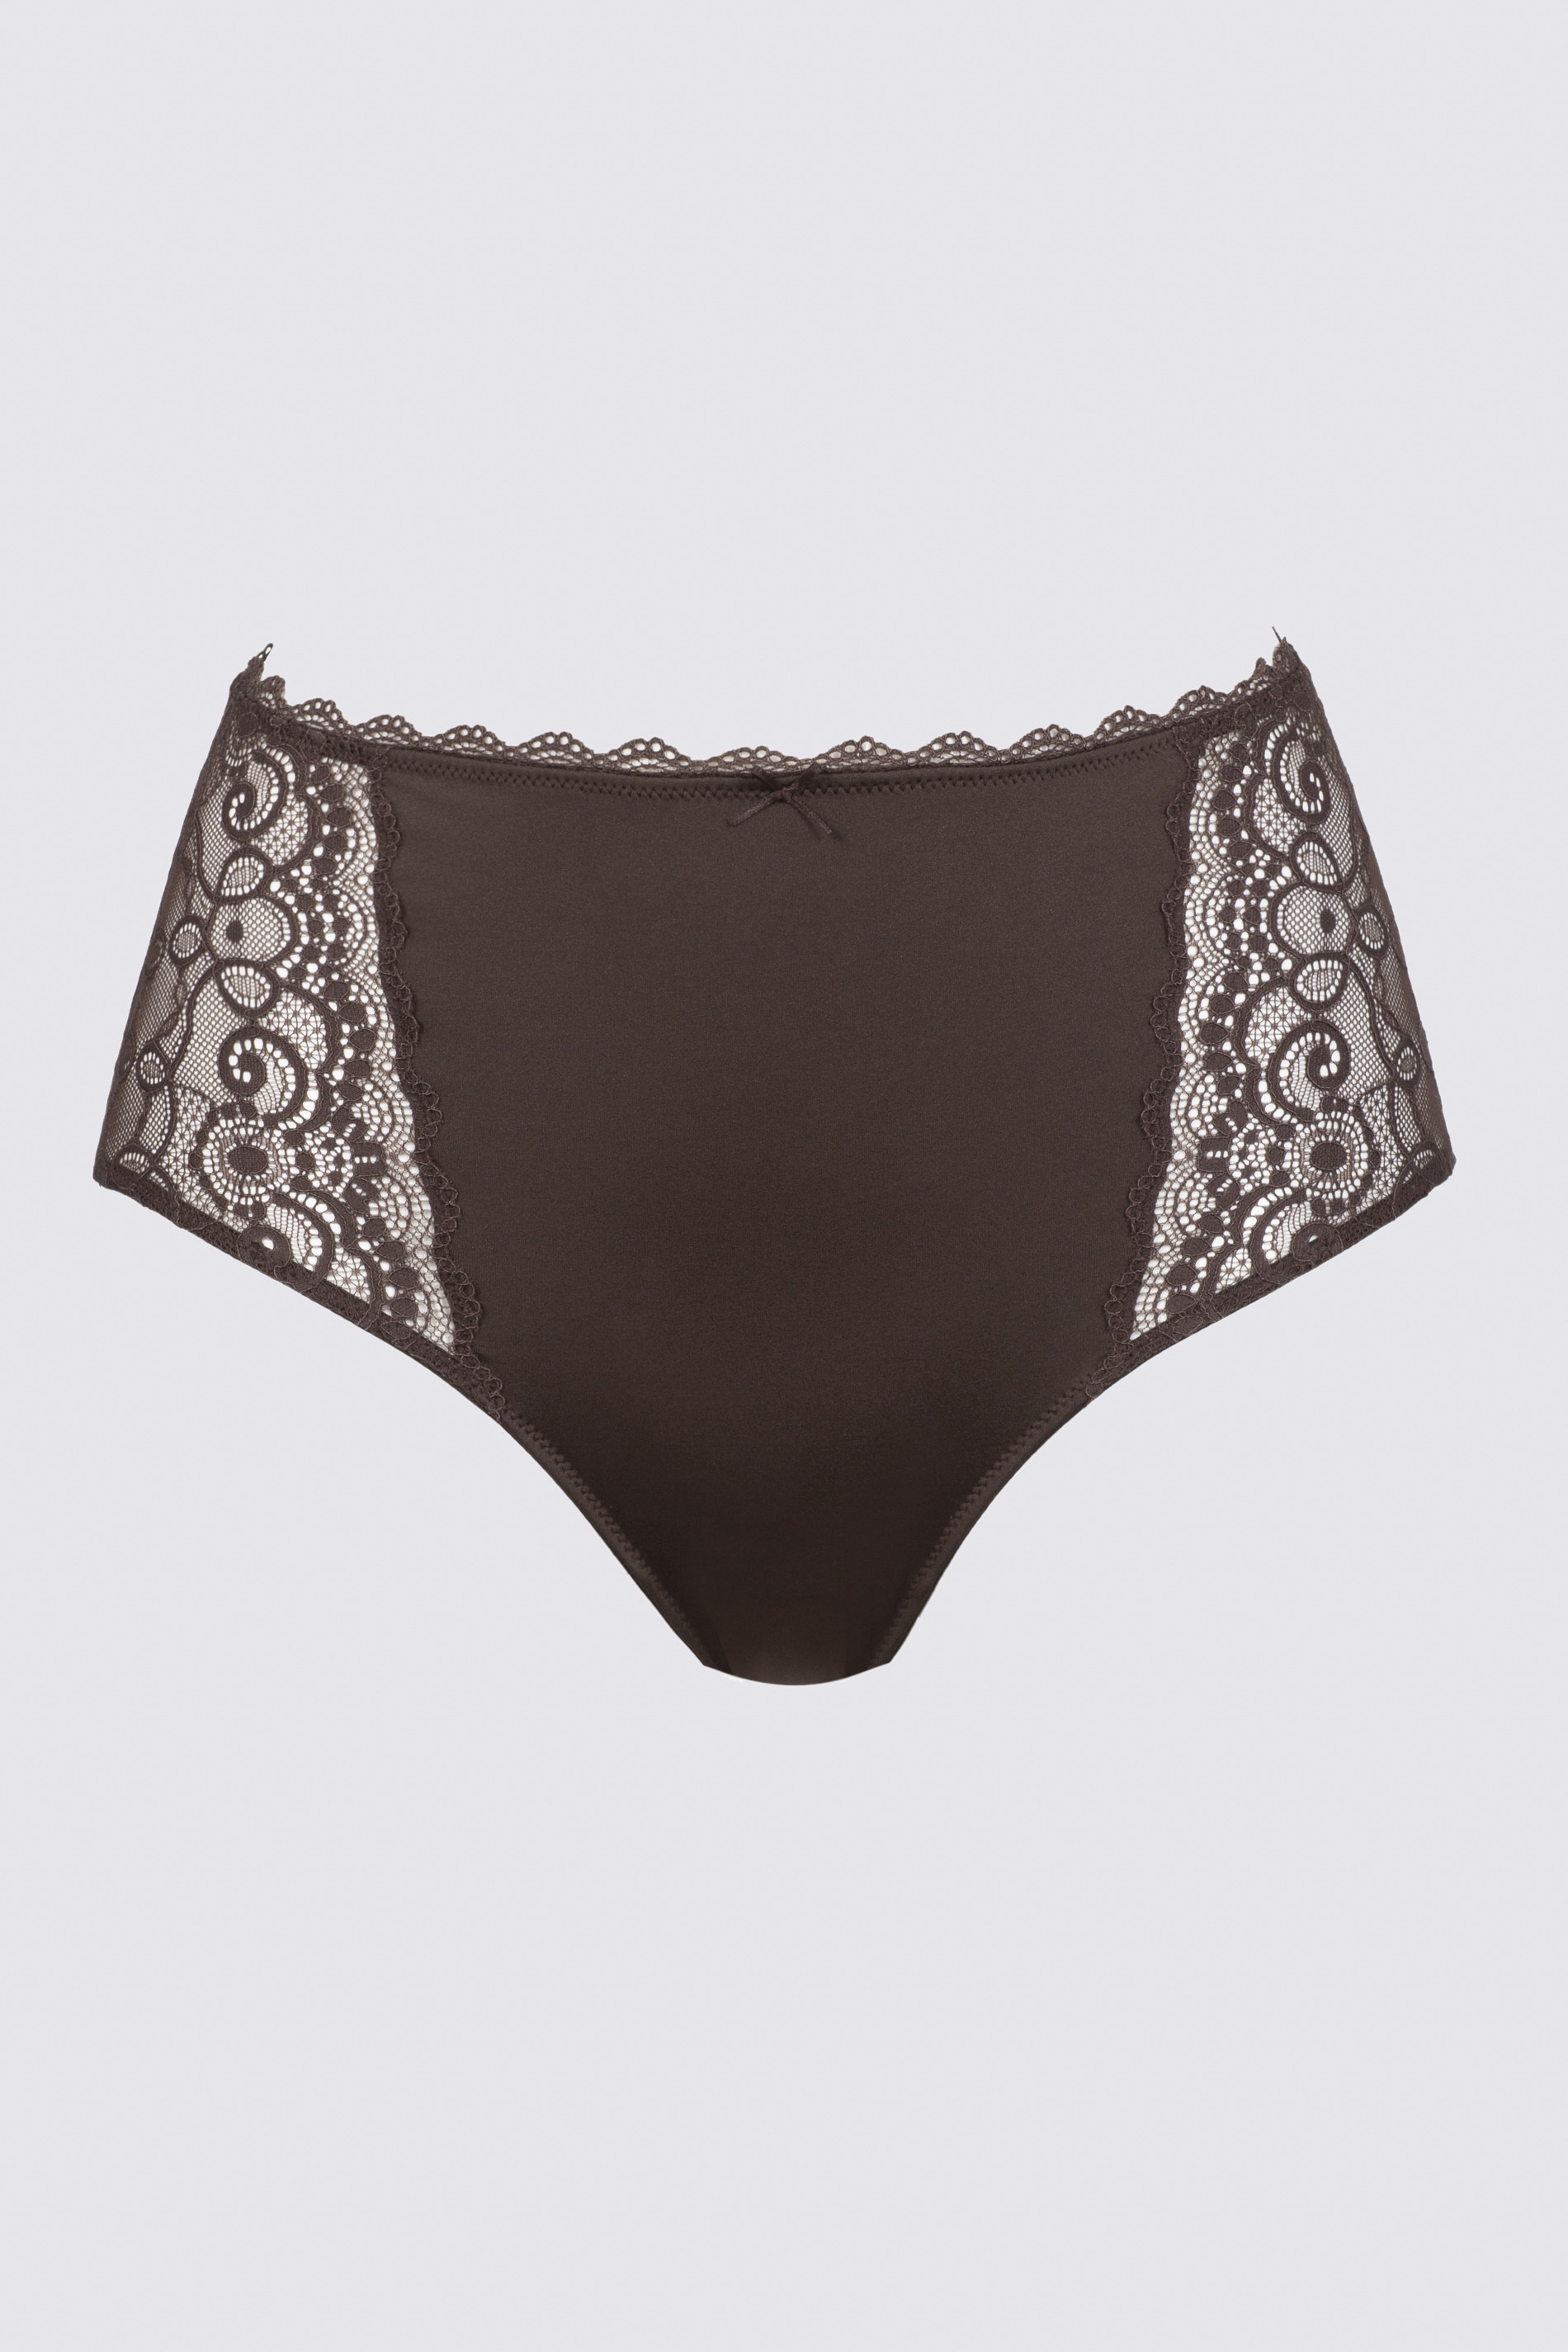 Tailleslip Liquorice Brown Serie Amorous Uitknippen | mey®